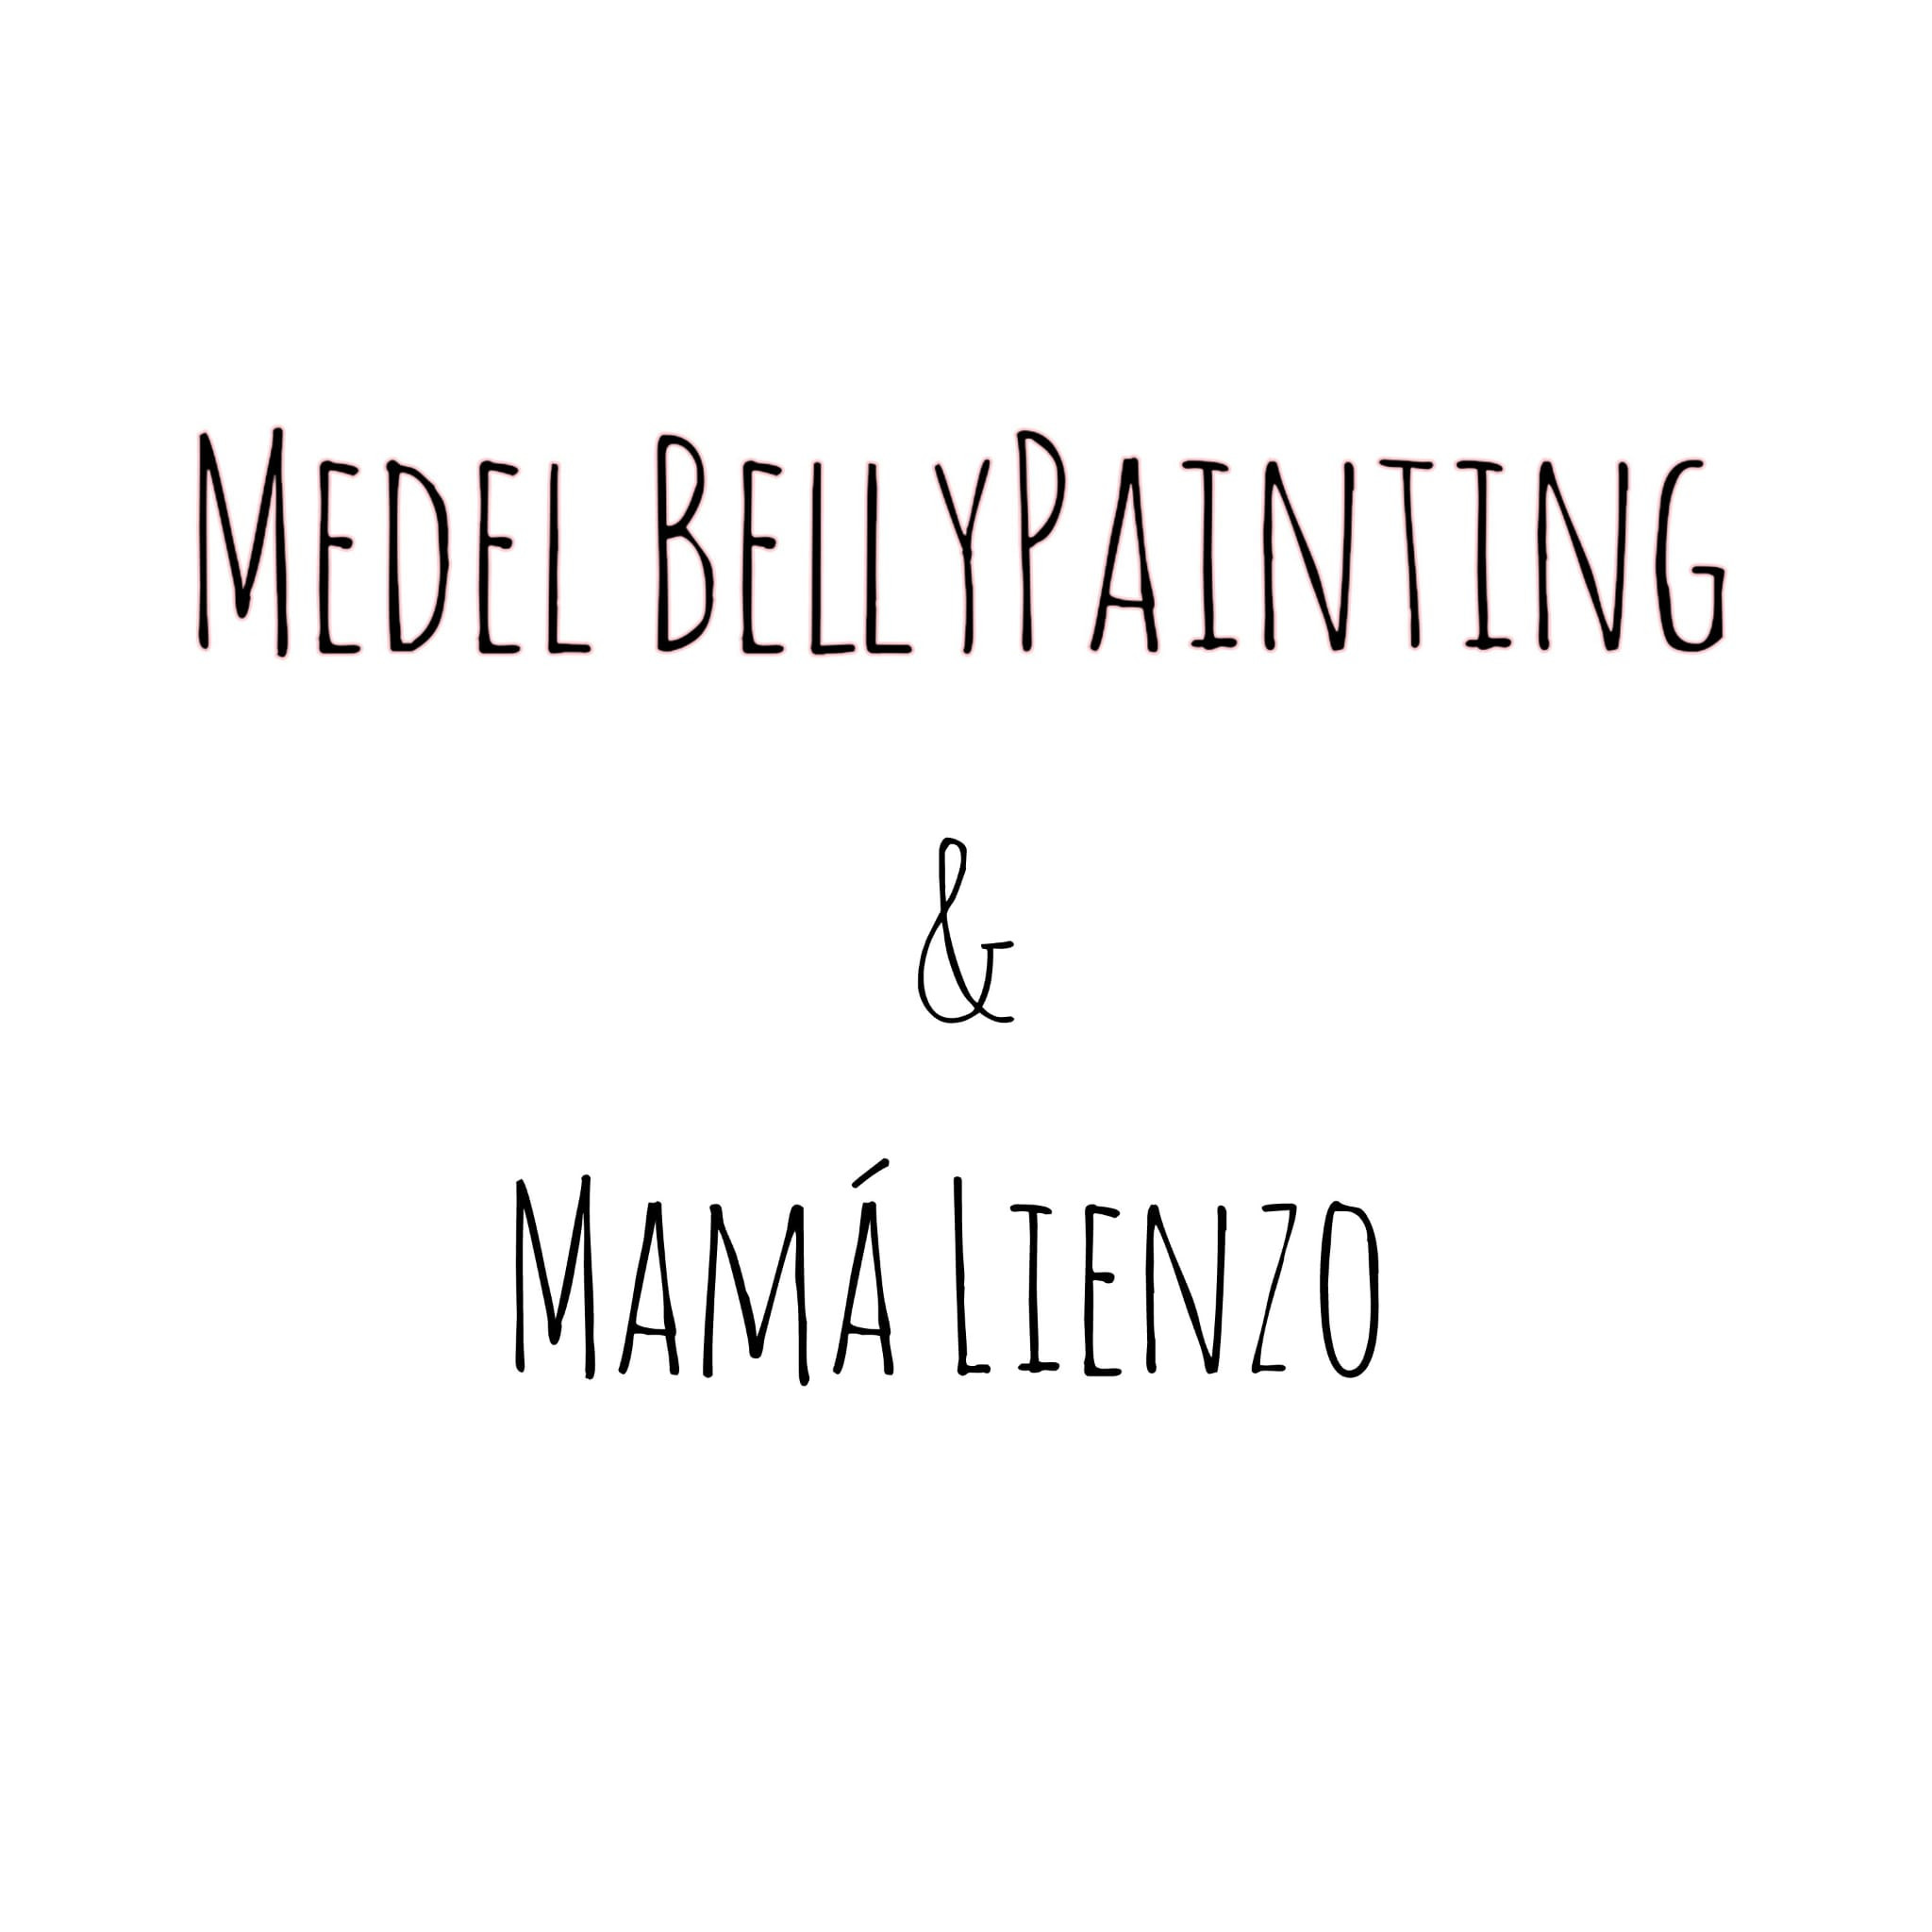 Medel Bellypainting & Mamá Lienzo